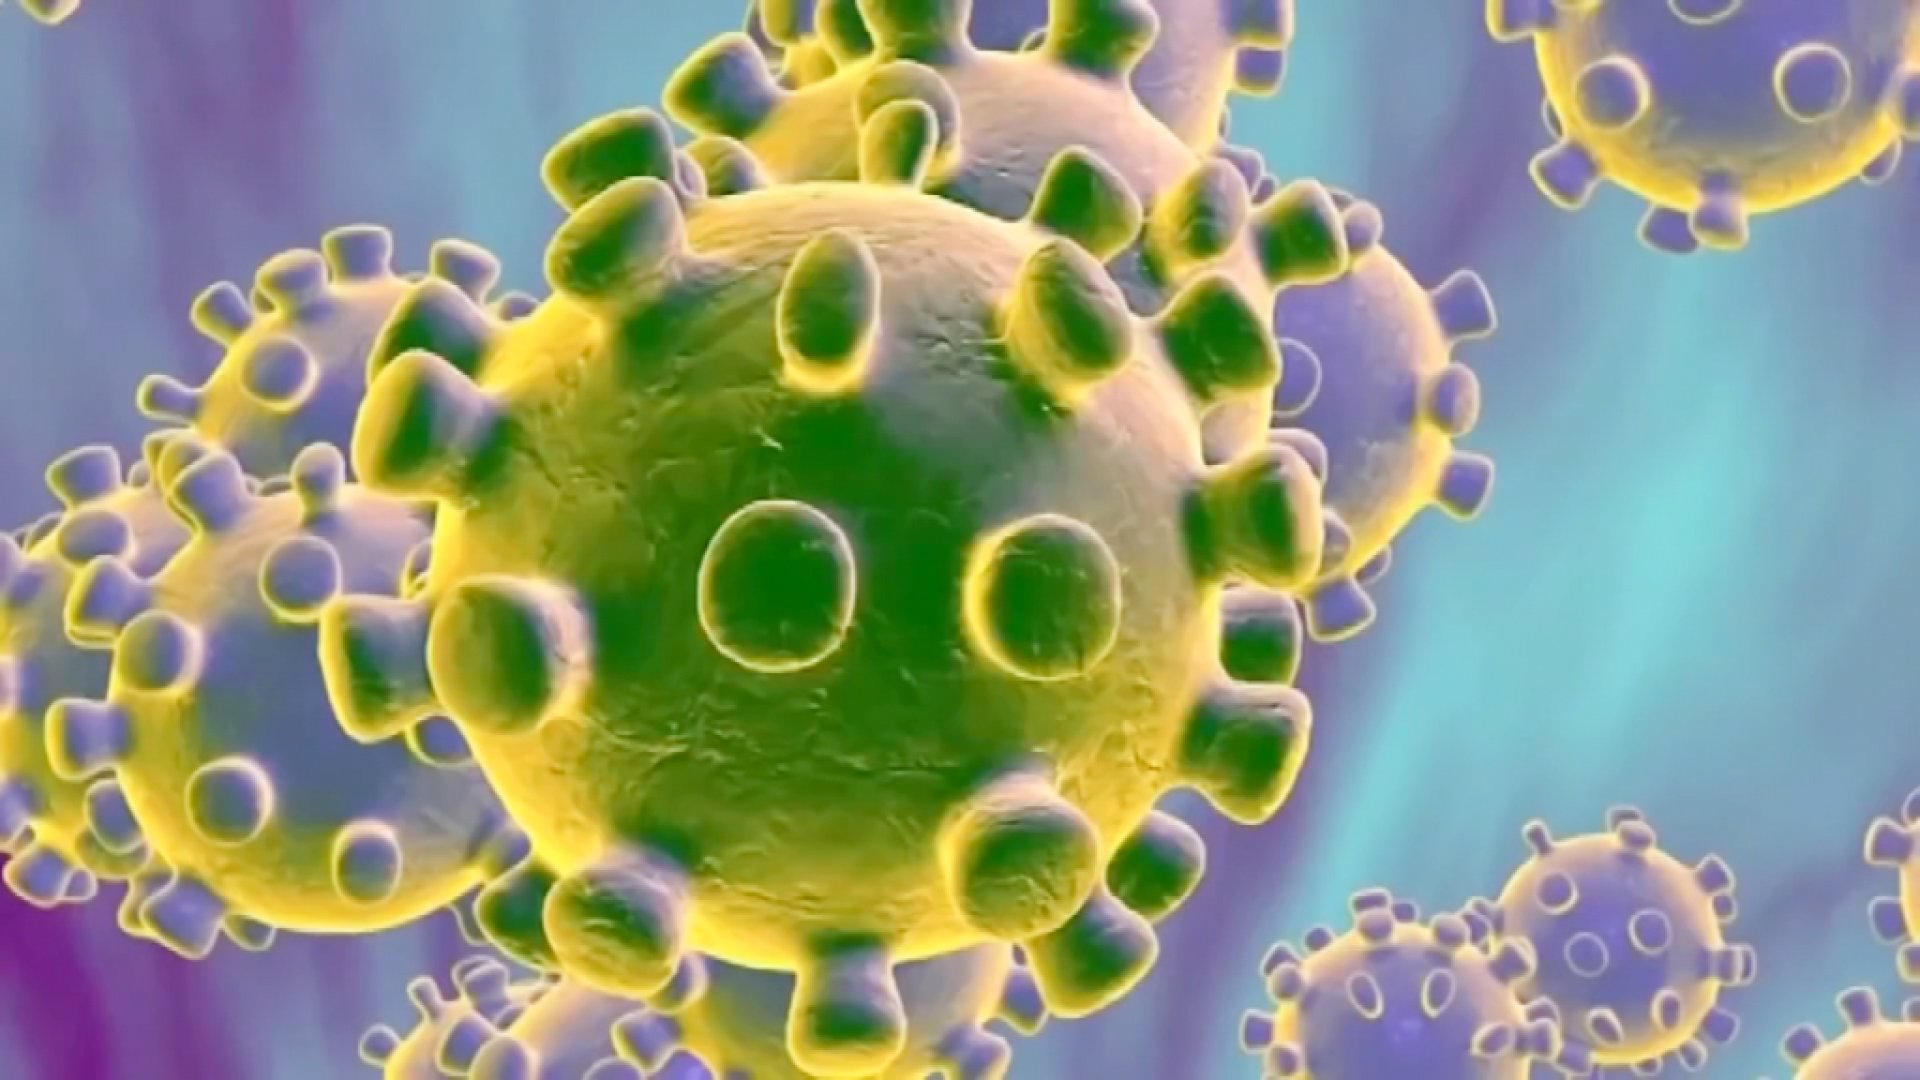 illustration of a virus particle with spike proteins sticking out of it